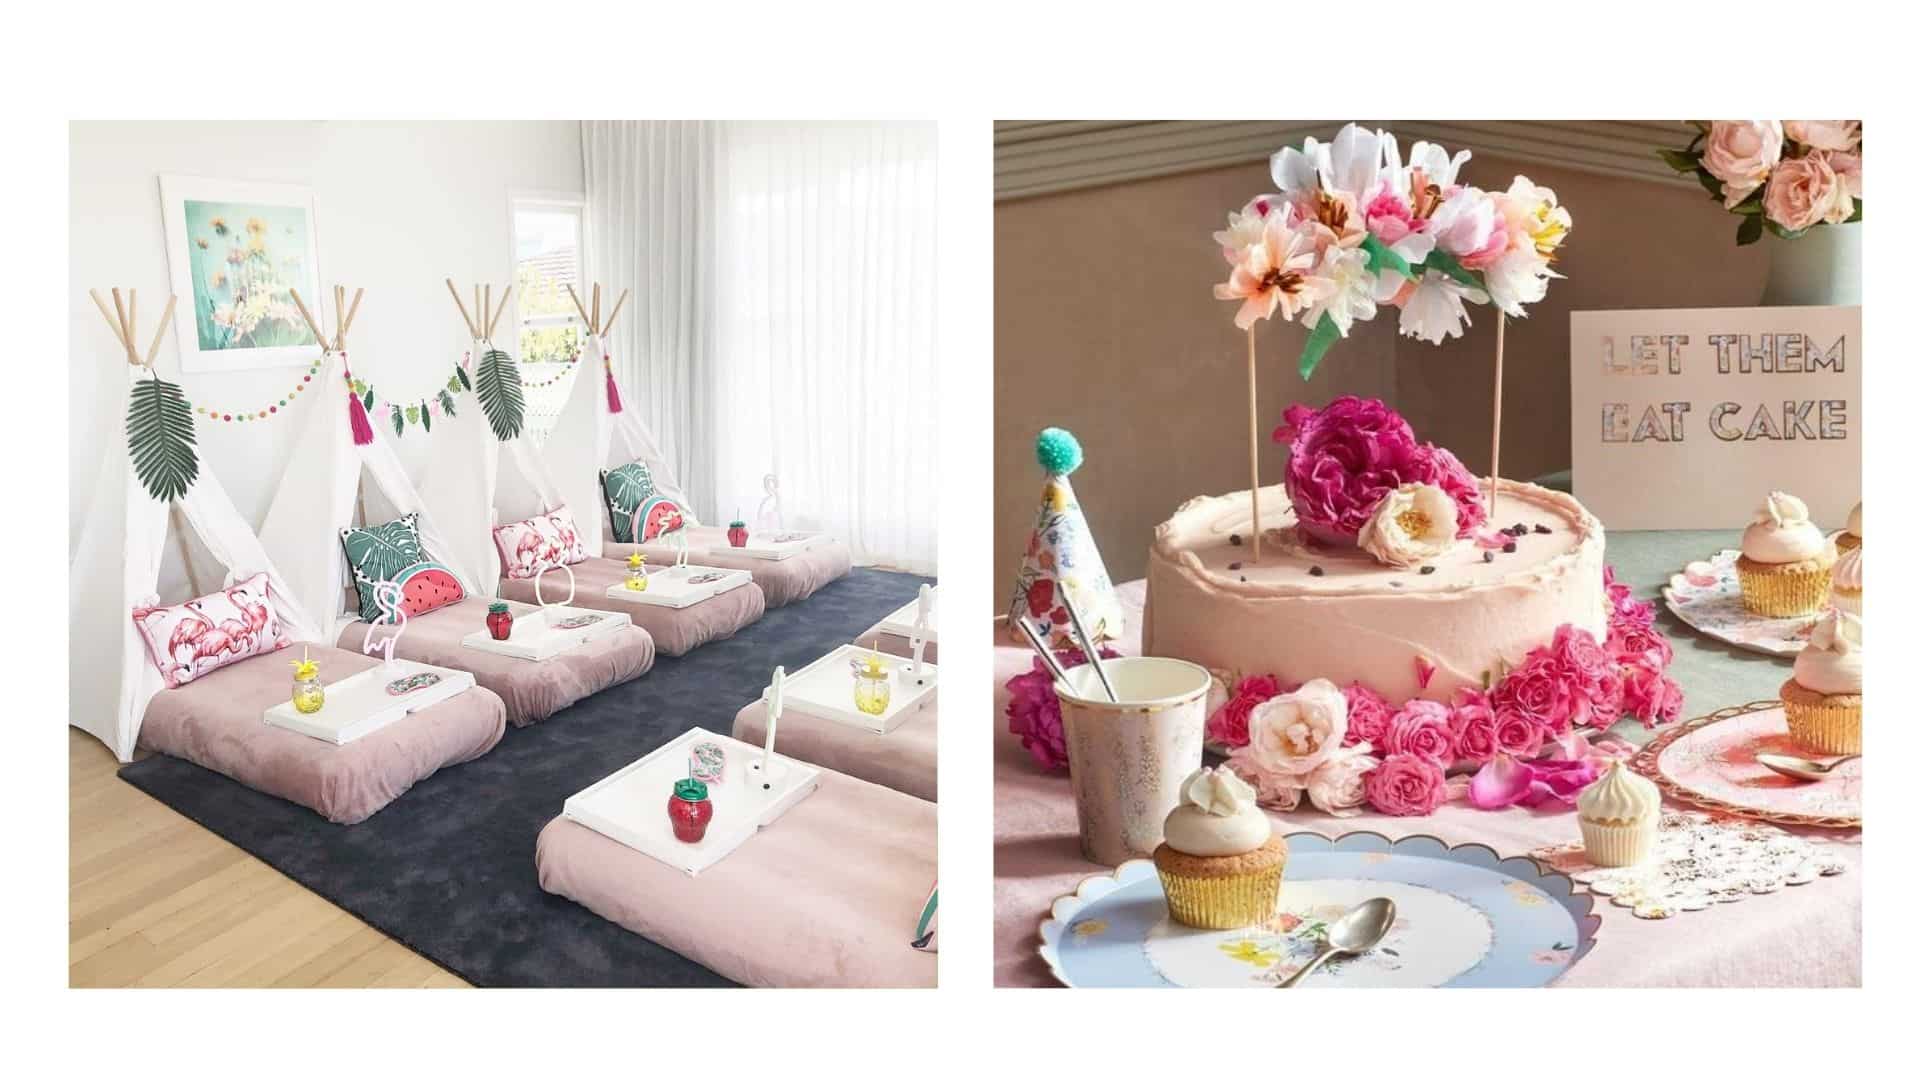 A split image, the one on the left showing a children’s playroom converted for a slumber party with rows of matching beds with teepee awnings. The image on the right shows a tea party themed birthday party, with a large pink cake, cupcakes and party hats.